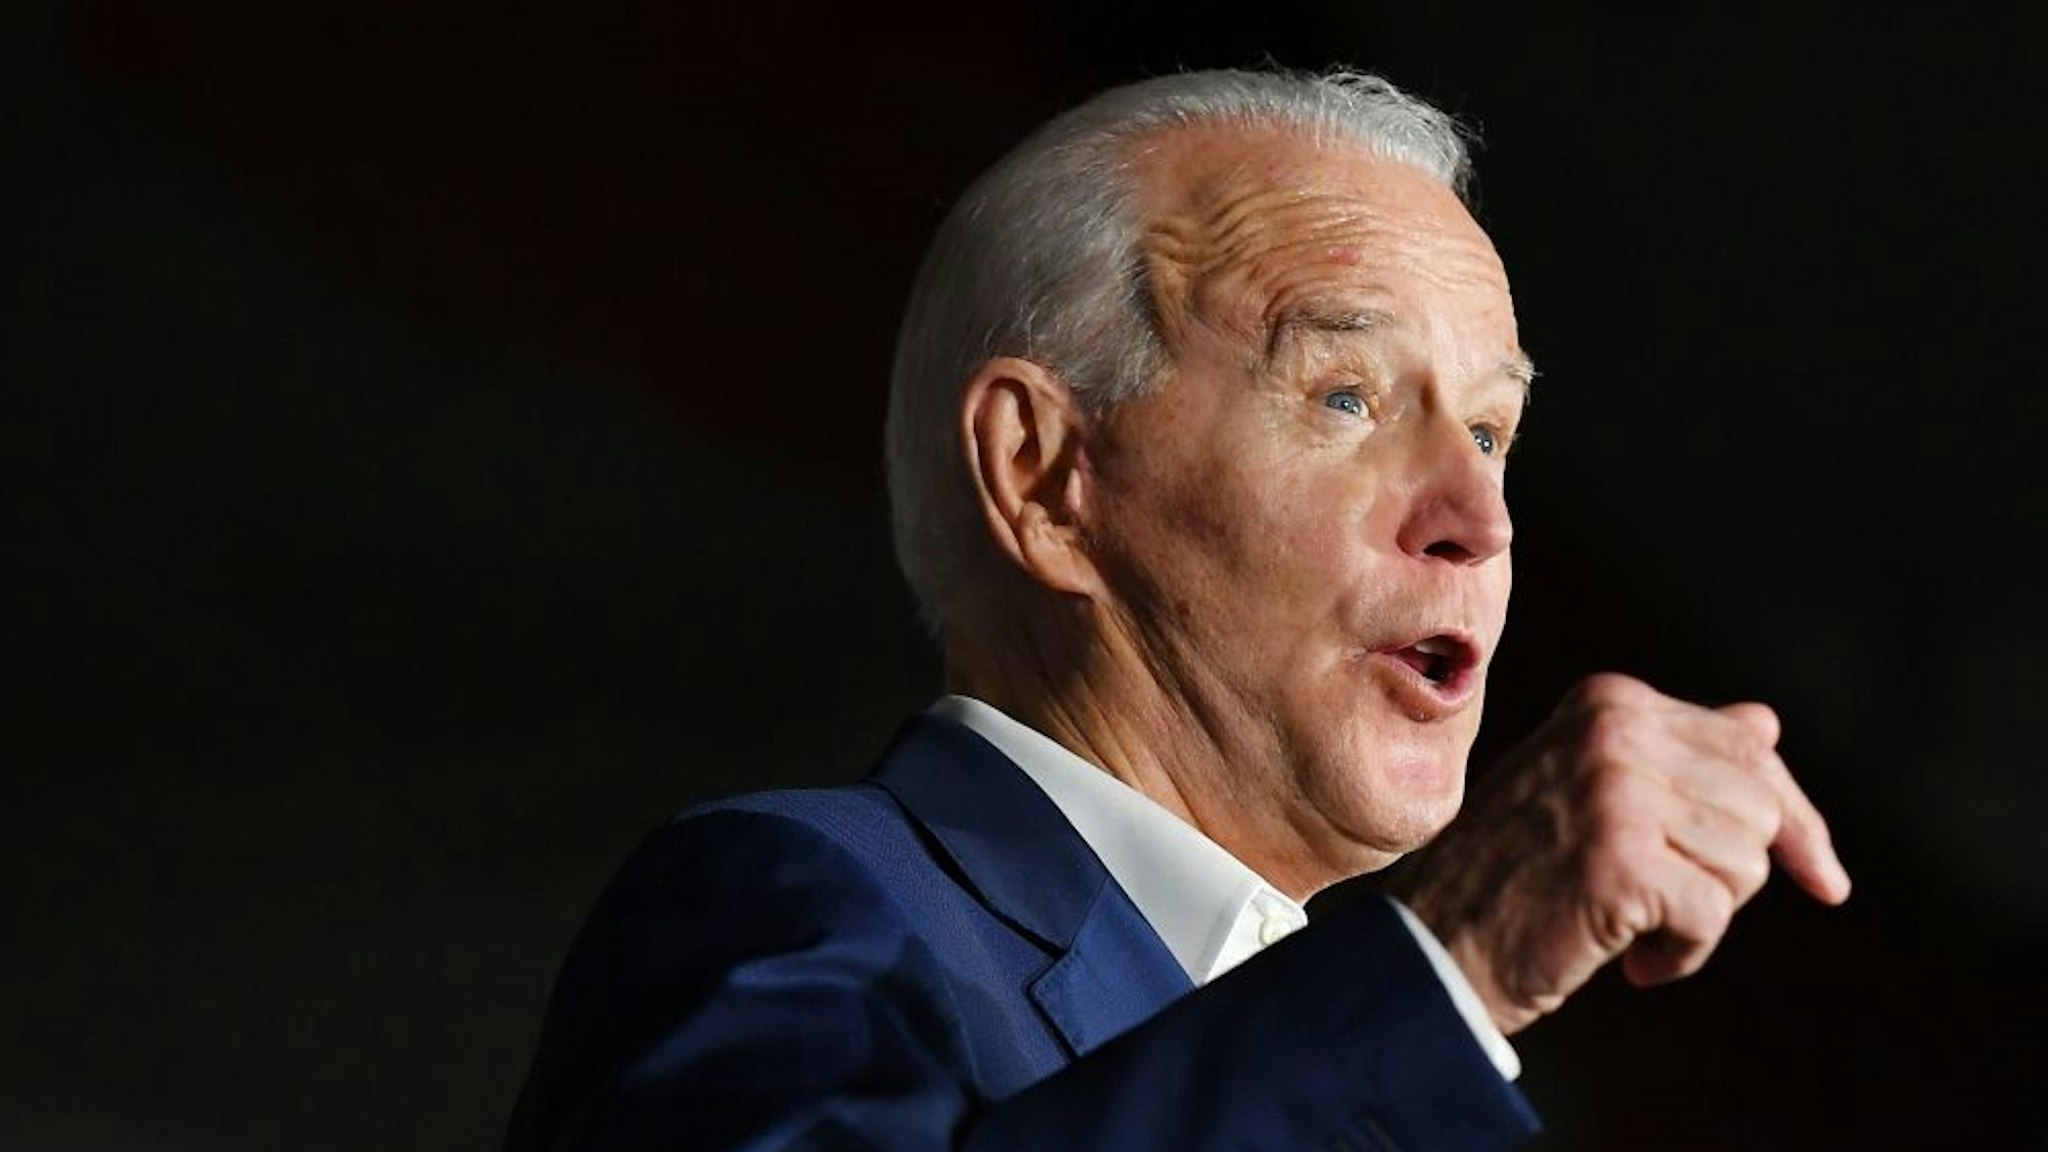 Democratic presidential candidate Joe Biden speaks during a rally at Tougaloo College in Tougaloo, Mississippi on March 8, 2020. (Photo by MANDEL NGAN / AFP) (Photo by